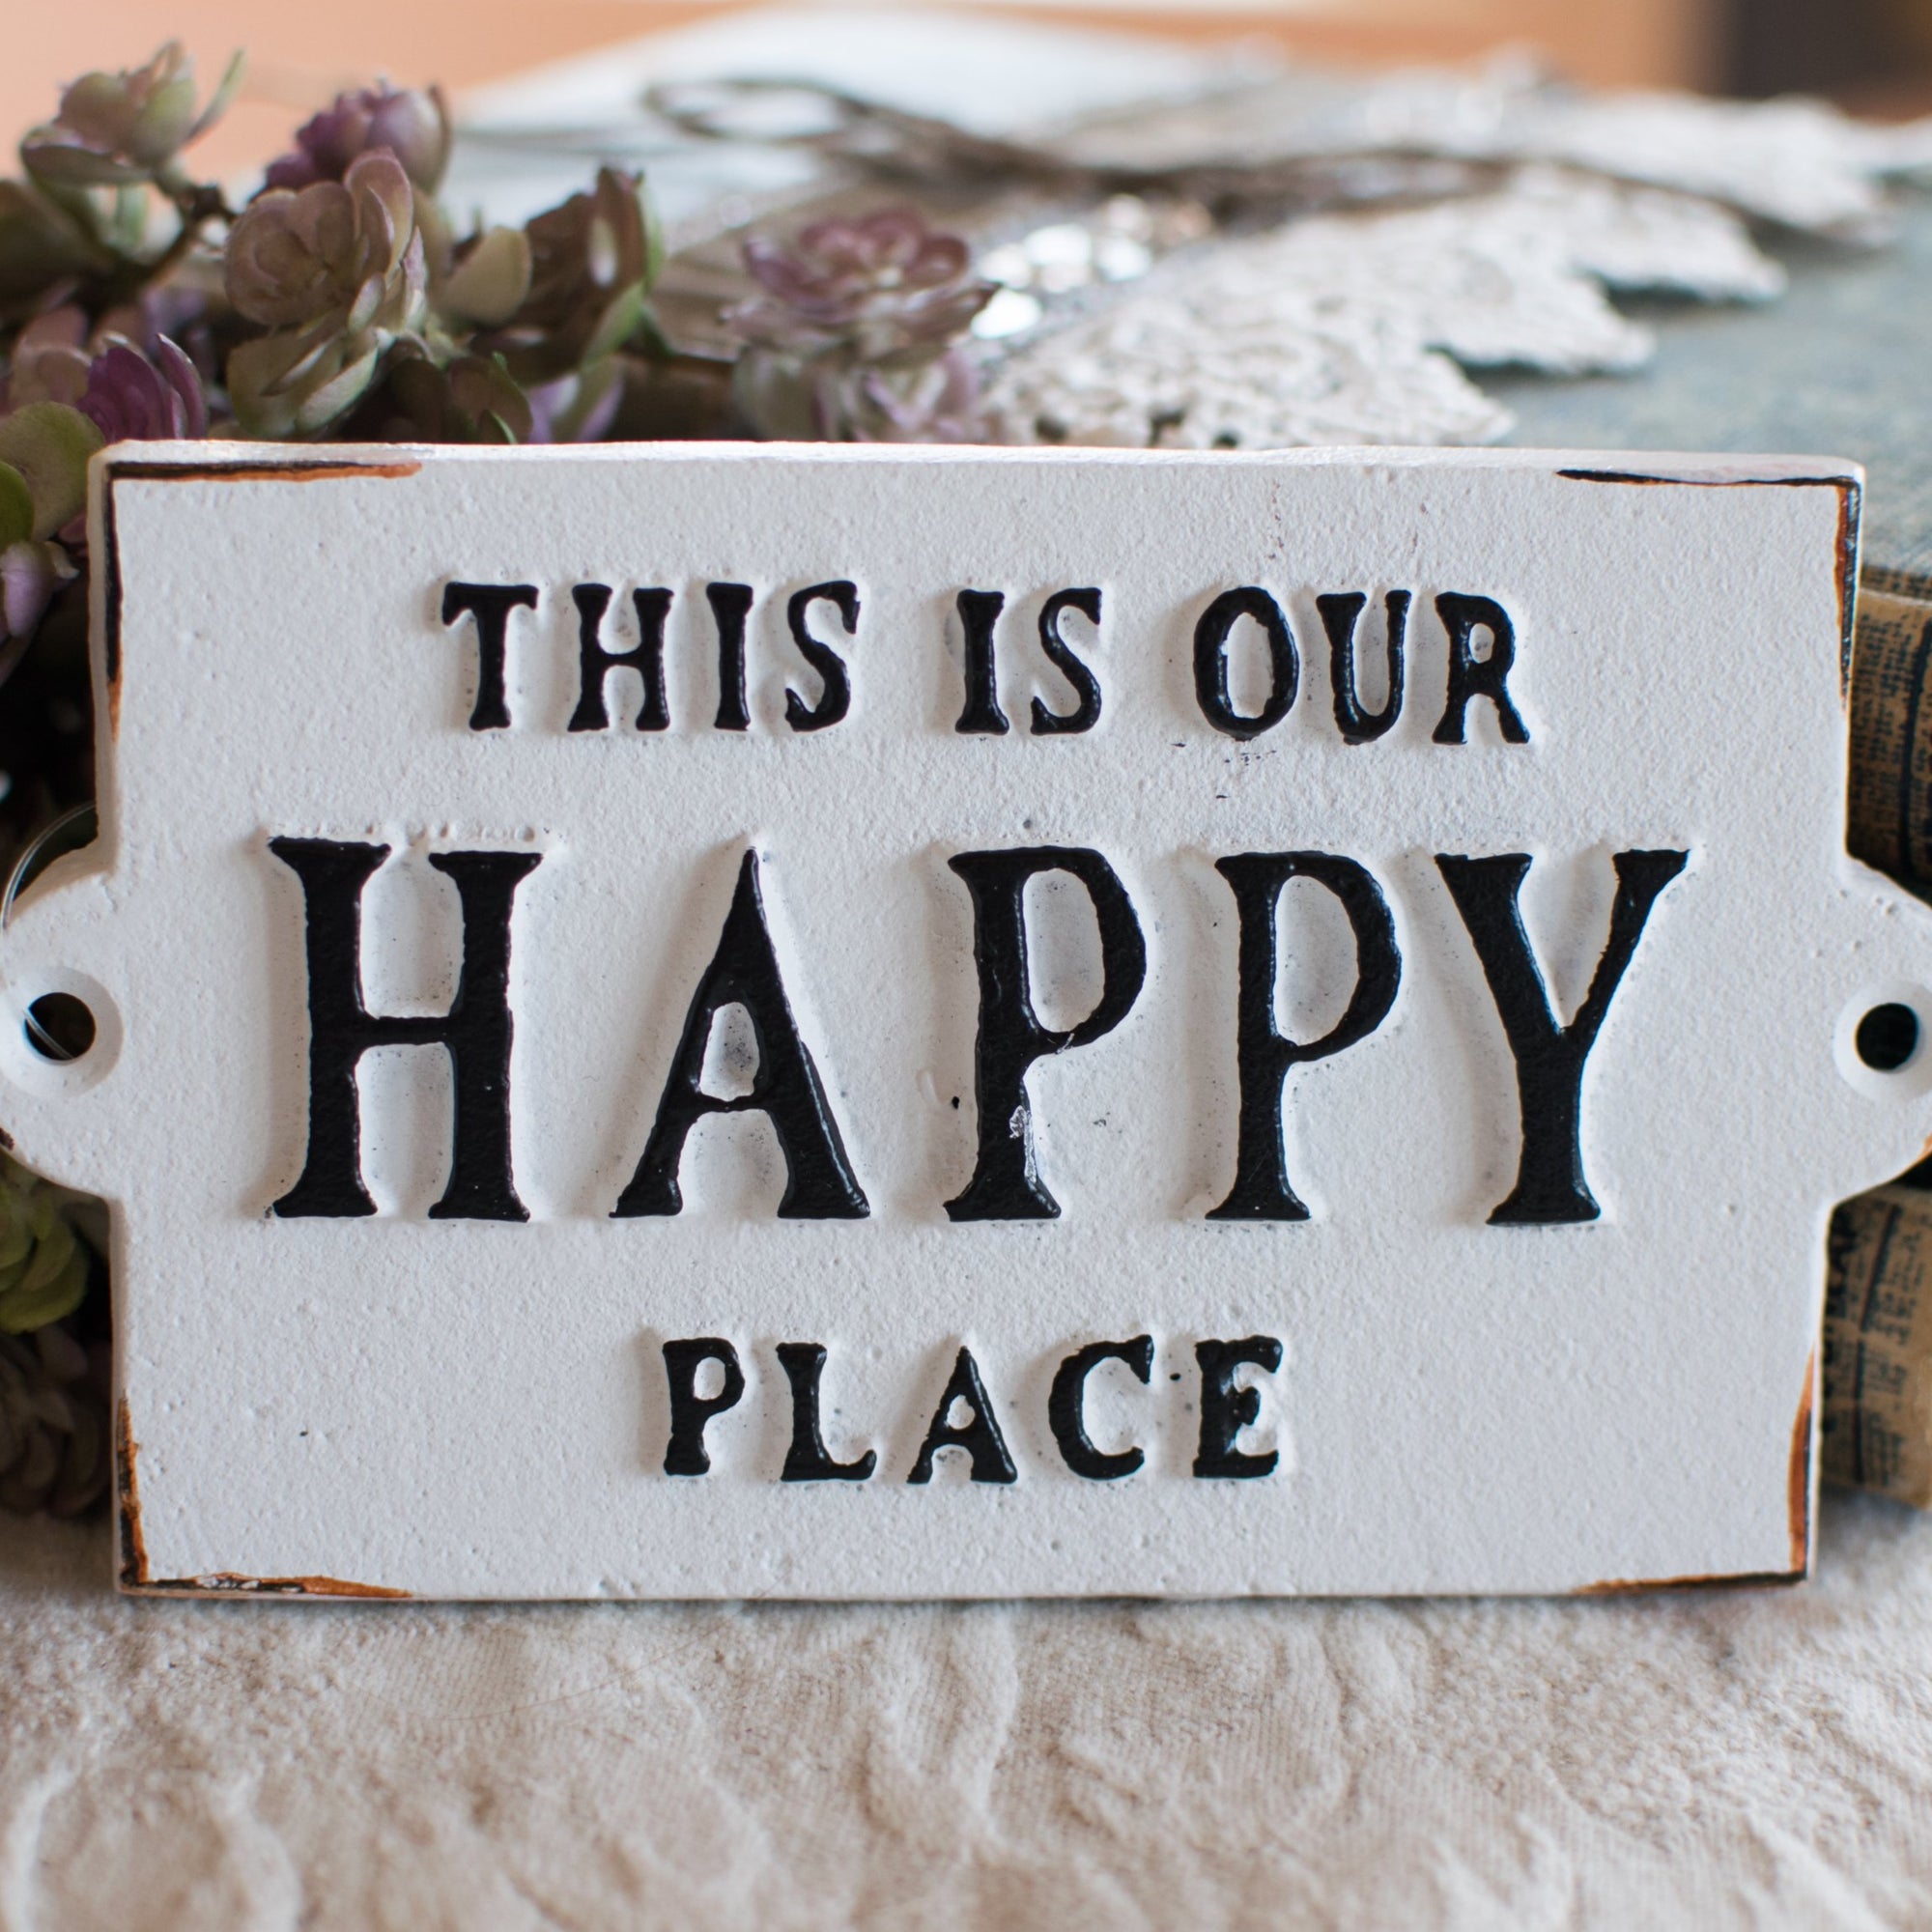 This is Our Happy Place - Small Iron Wall Plaque